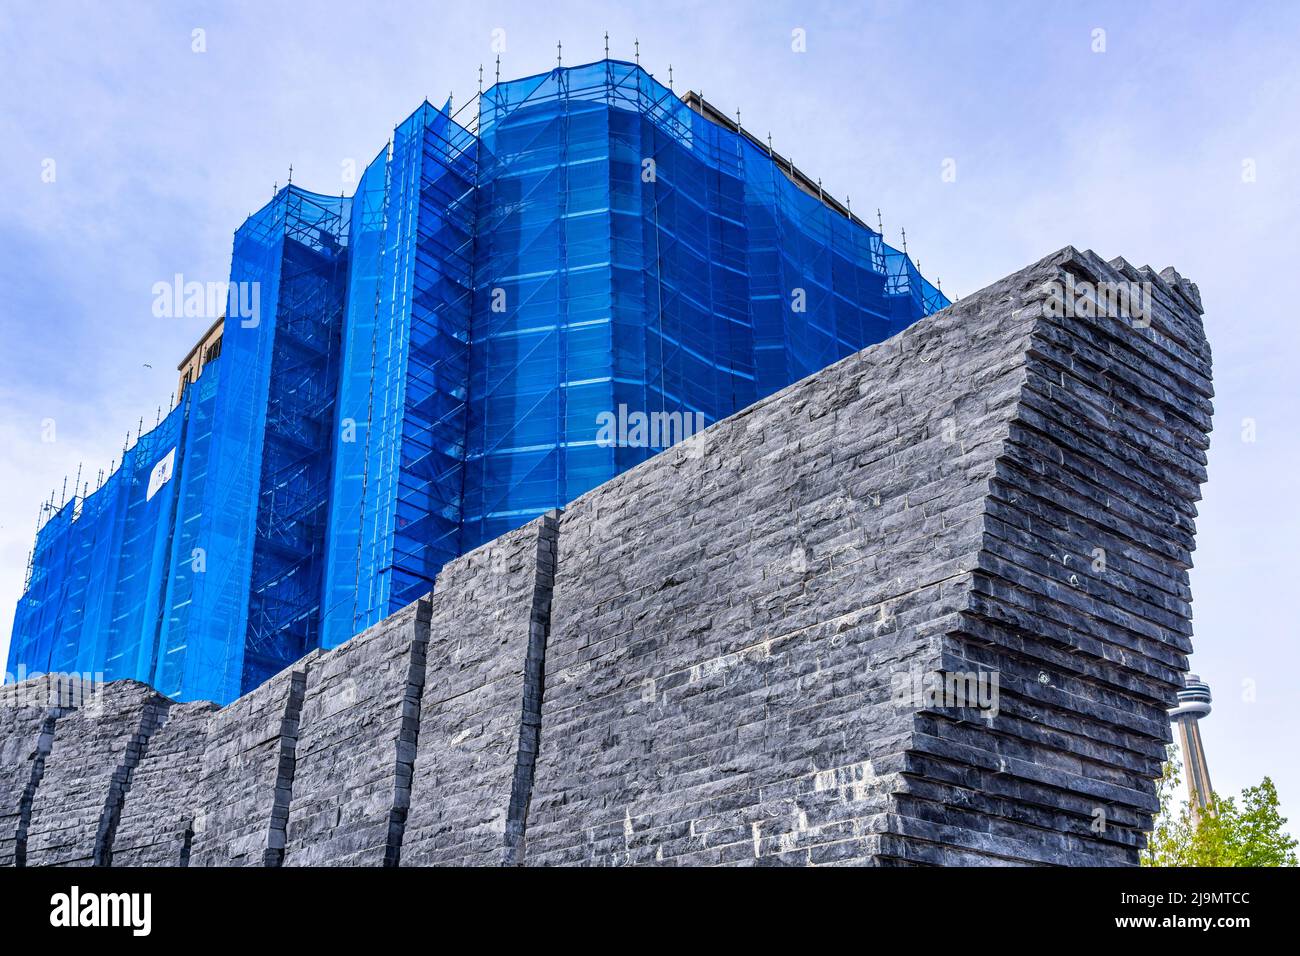 Revitalization of the Canada Malting Silos (covered in blue fabric). The heritage place is framed in a stone sculpture in Ireland Park. Stock Photo